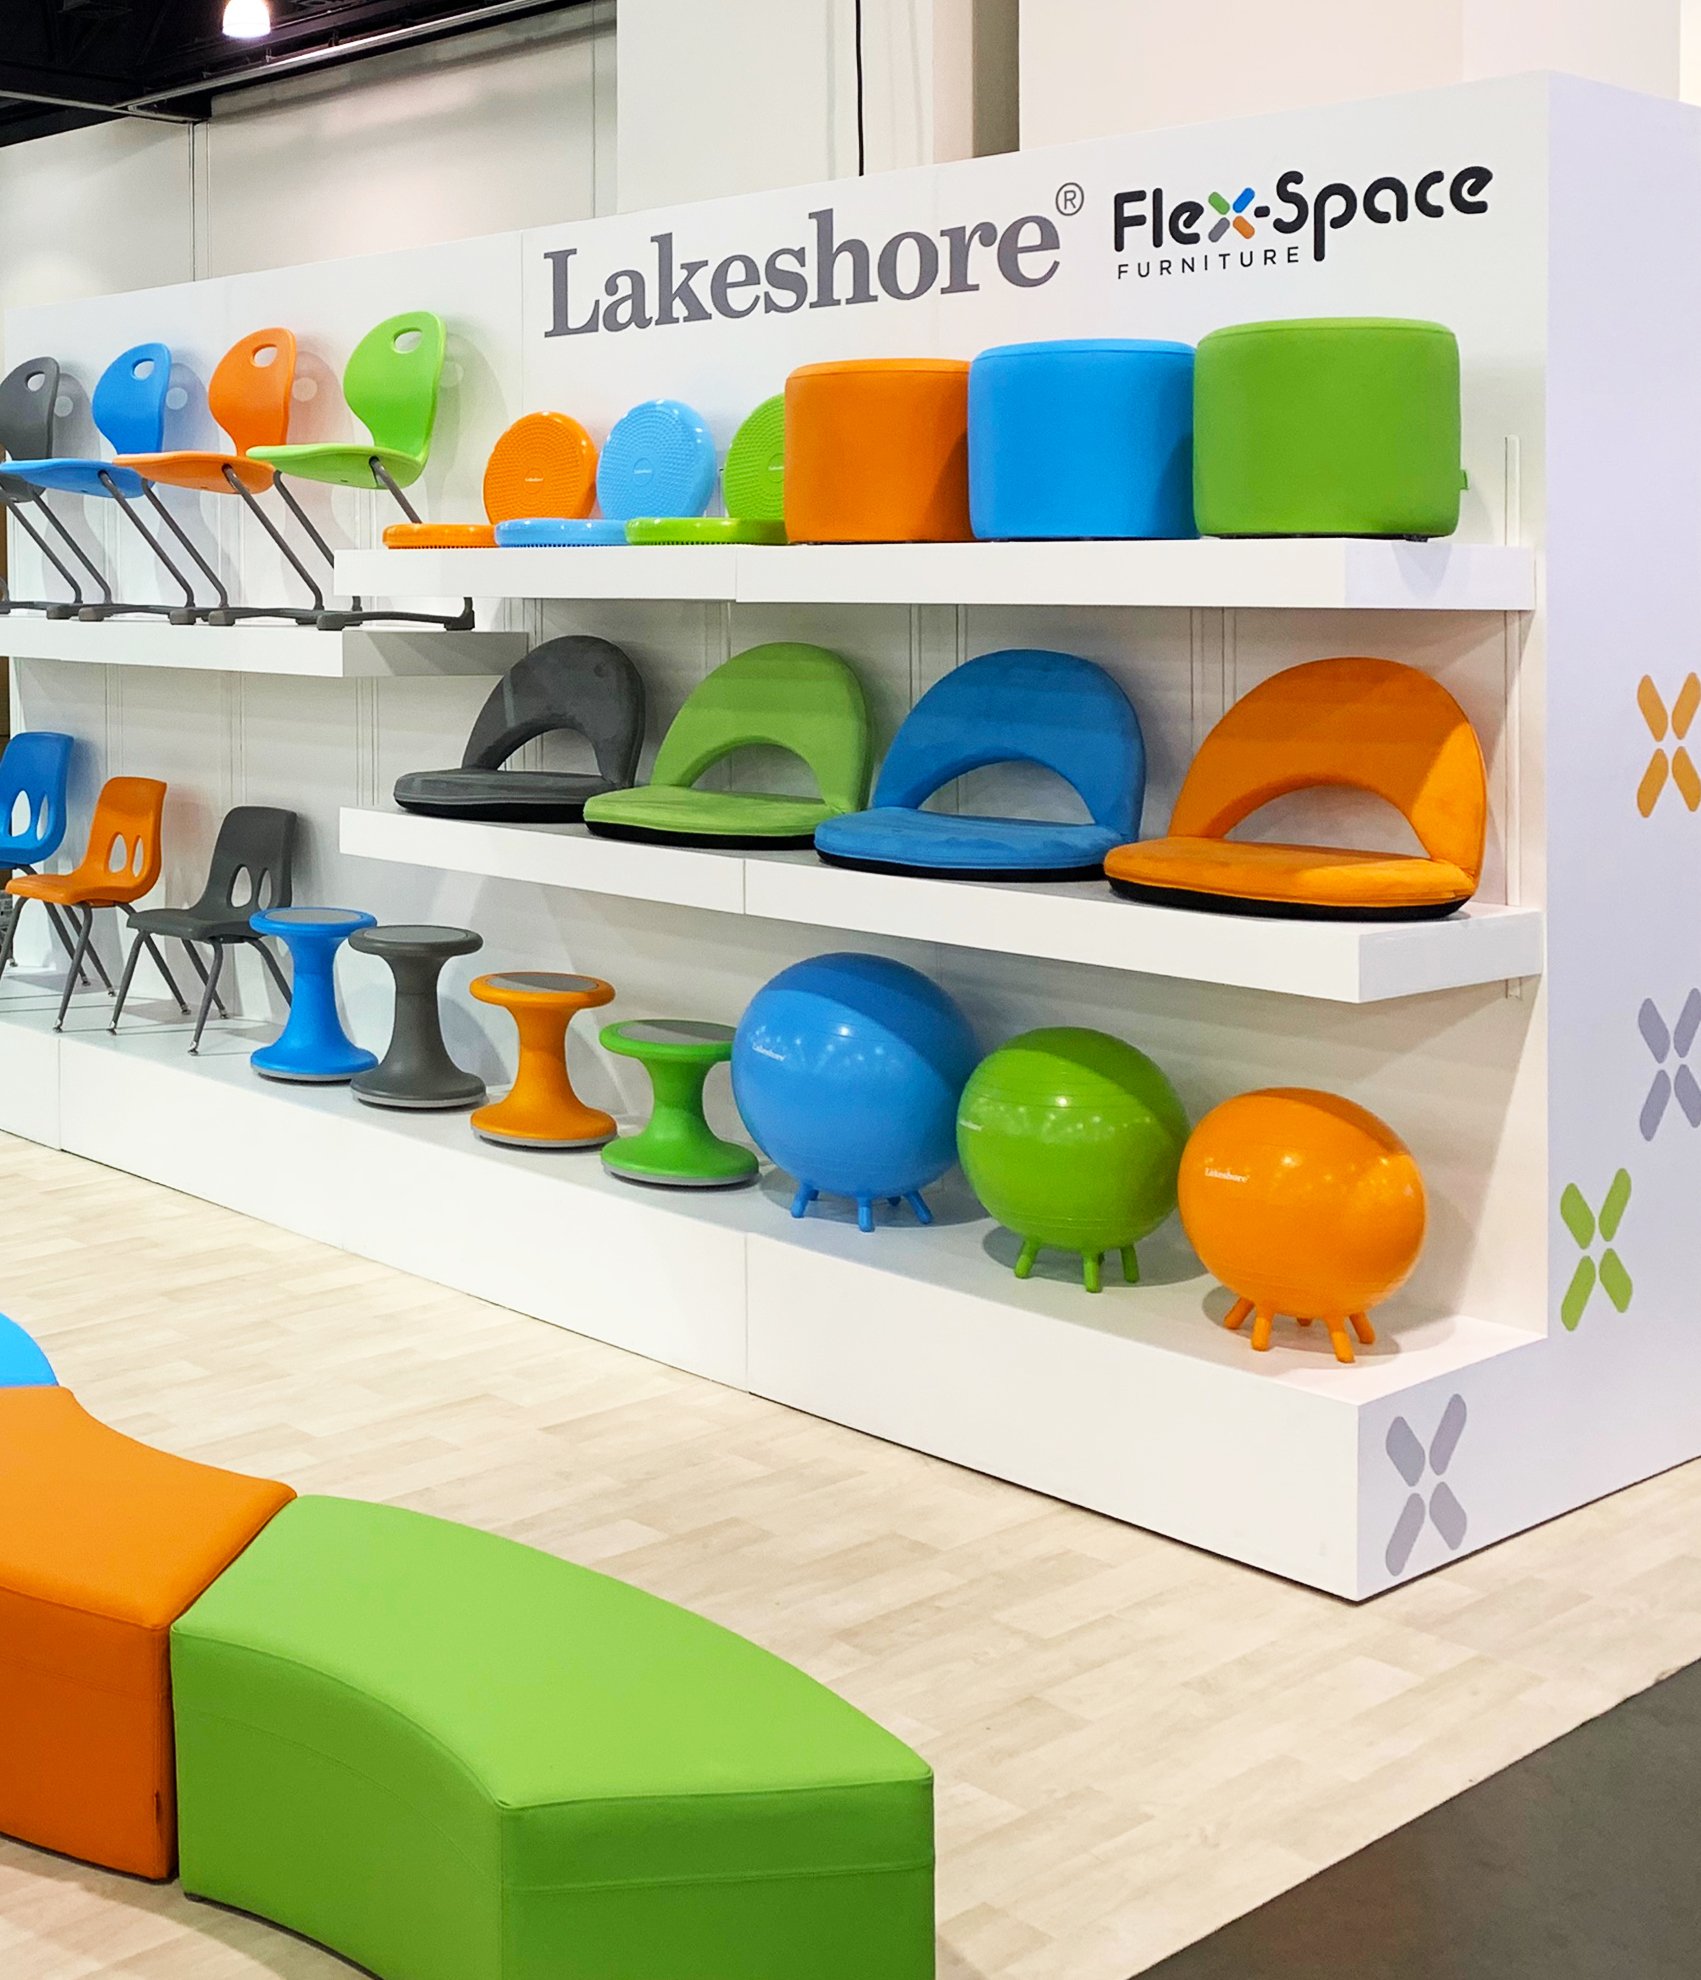  The design of our “Chair Wall” allowed us to elevate our new Flex-Space seating into art, while providing a visual focal-point for the booth, and increasing the amount of displayable product  